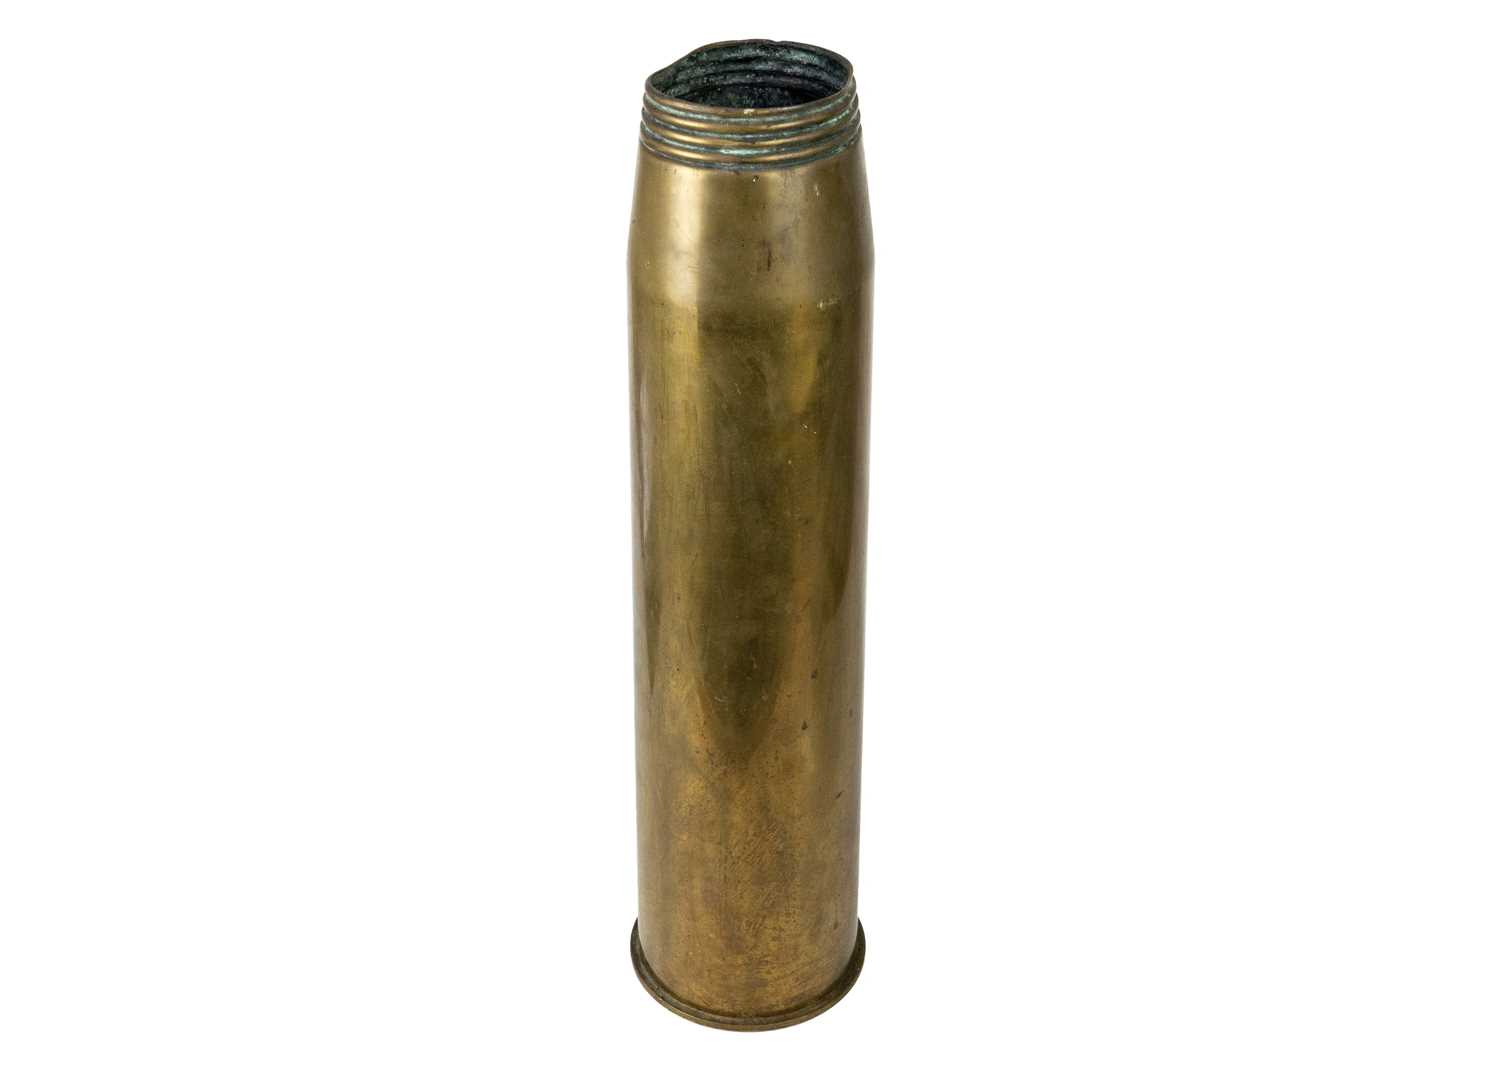 A 4.5 inch large brass naval shell case. - Image 2 of 3